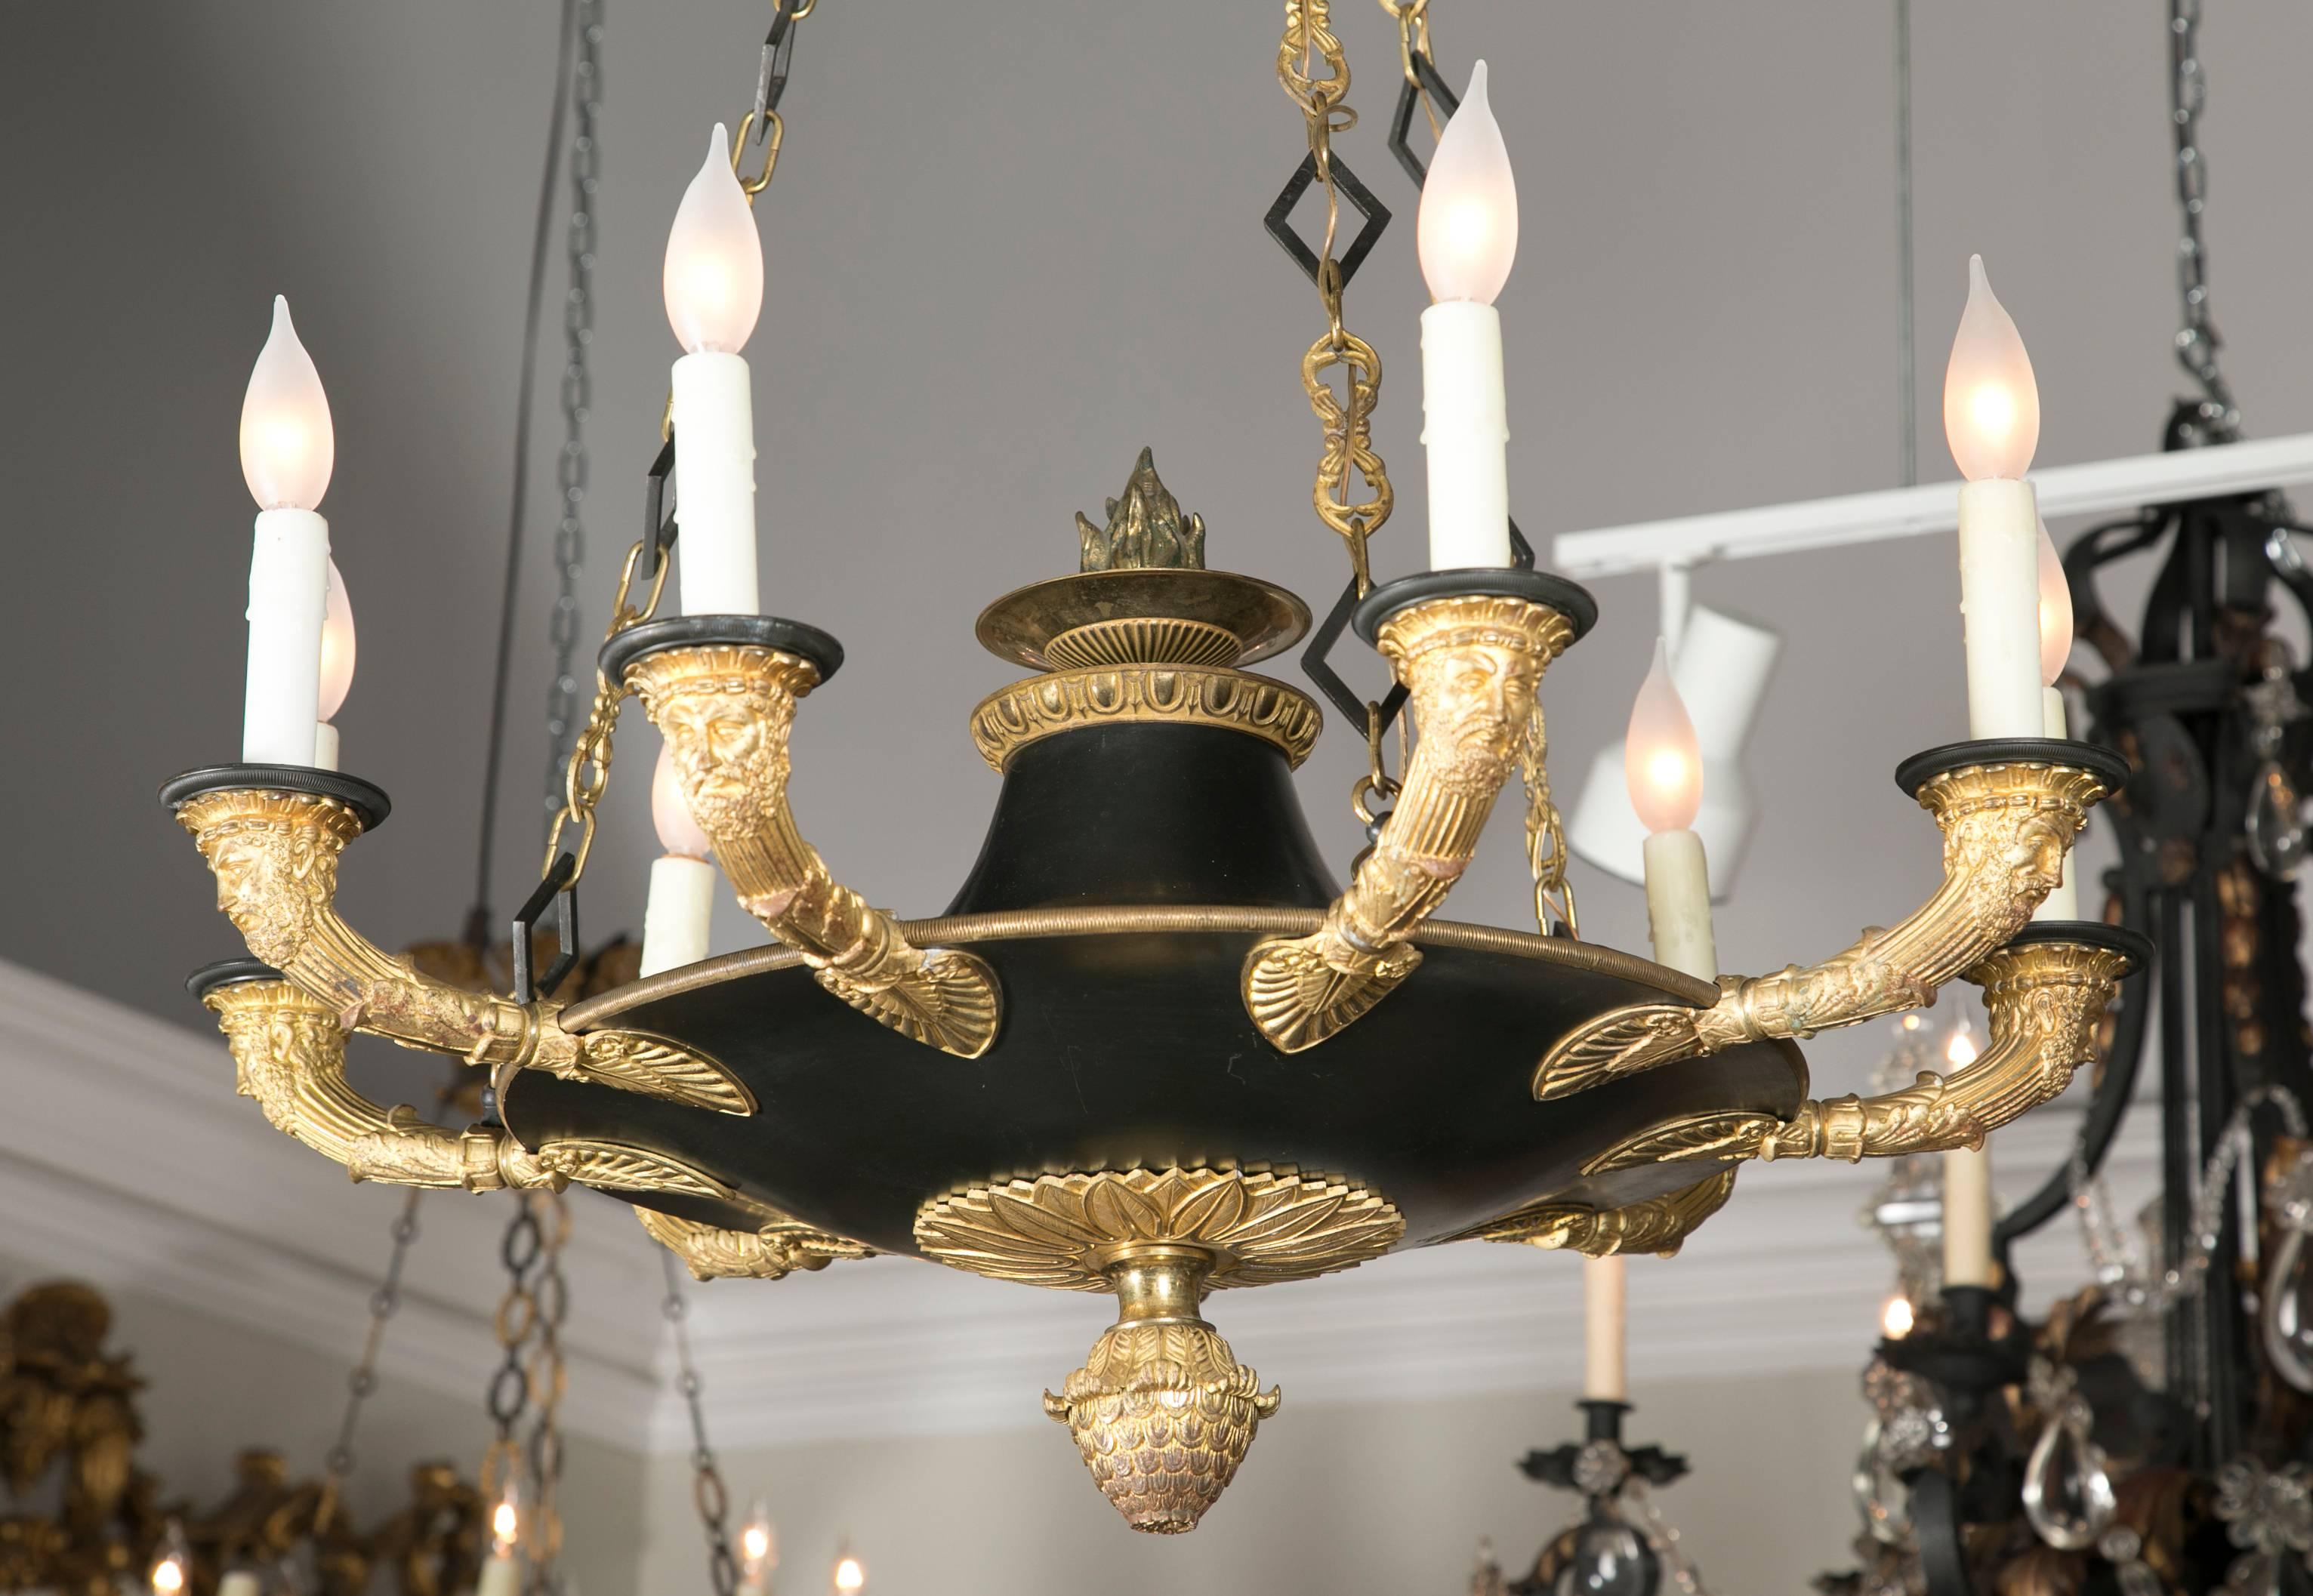 Wonderful chateau quality d'ore gilt and patinated bronze 9 light chandelier.  Provenance : Andrew Hall estate, Southport, CT.